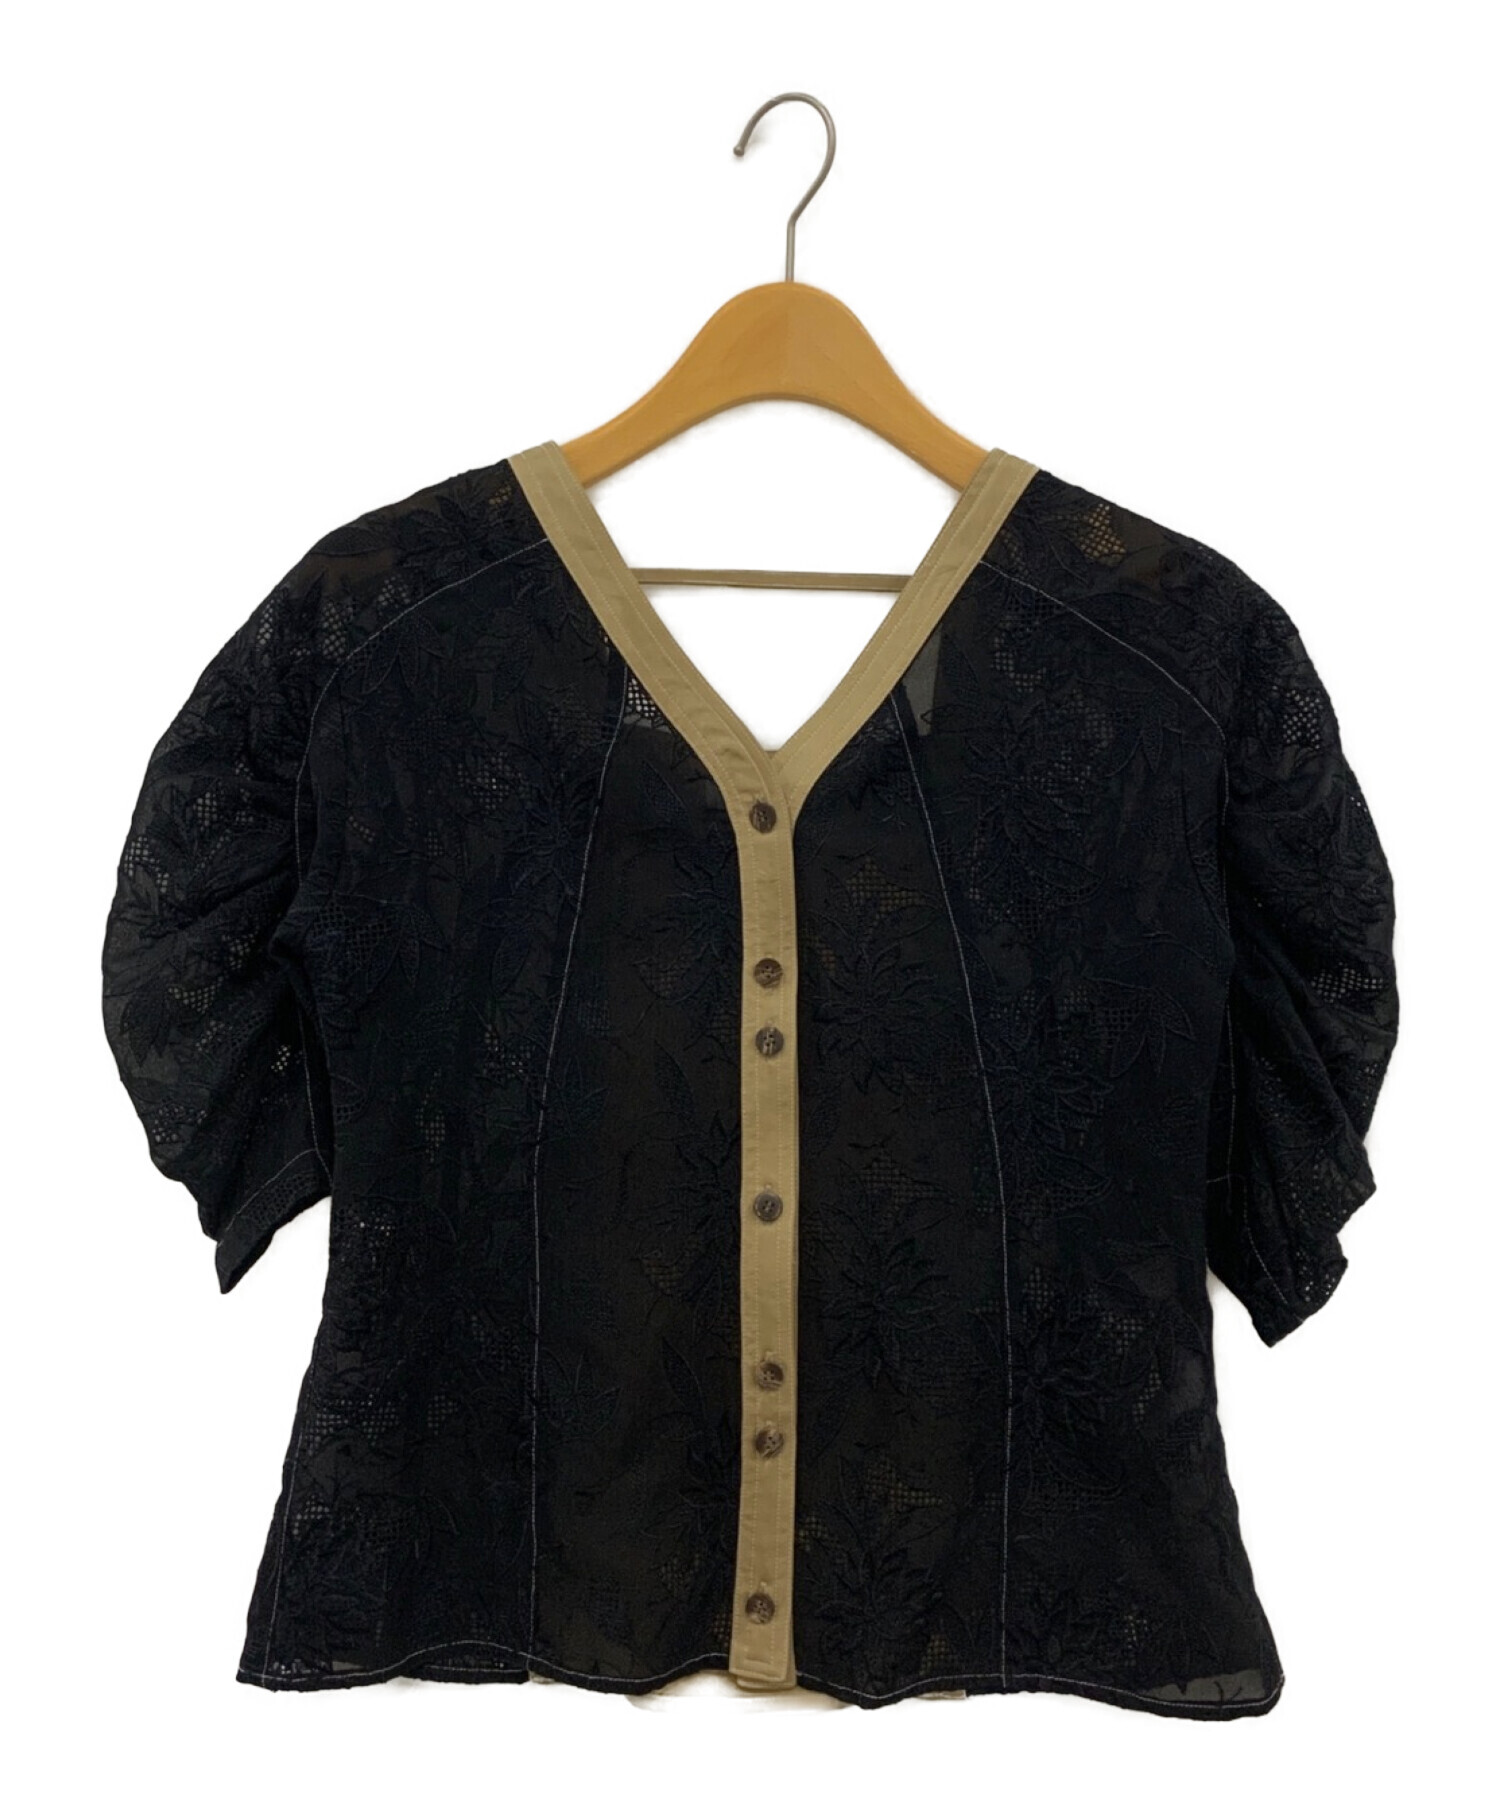 MURRAL Dahlia embroidery topブラウス